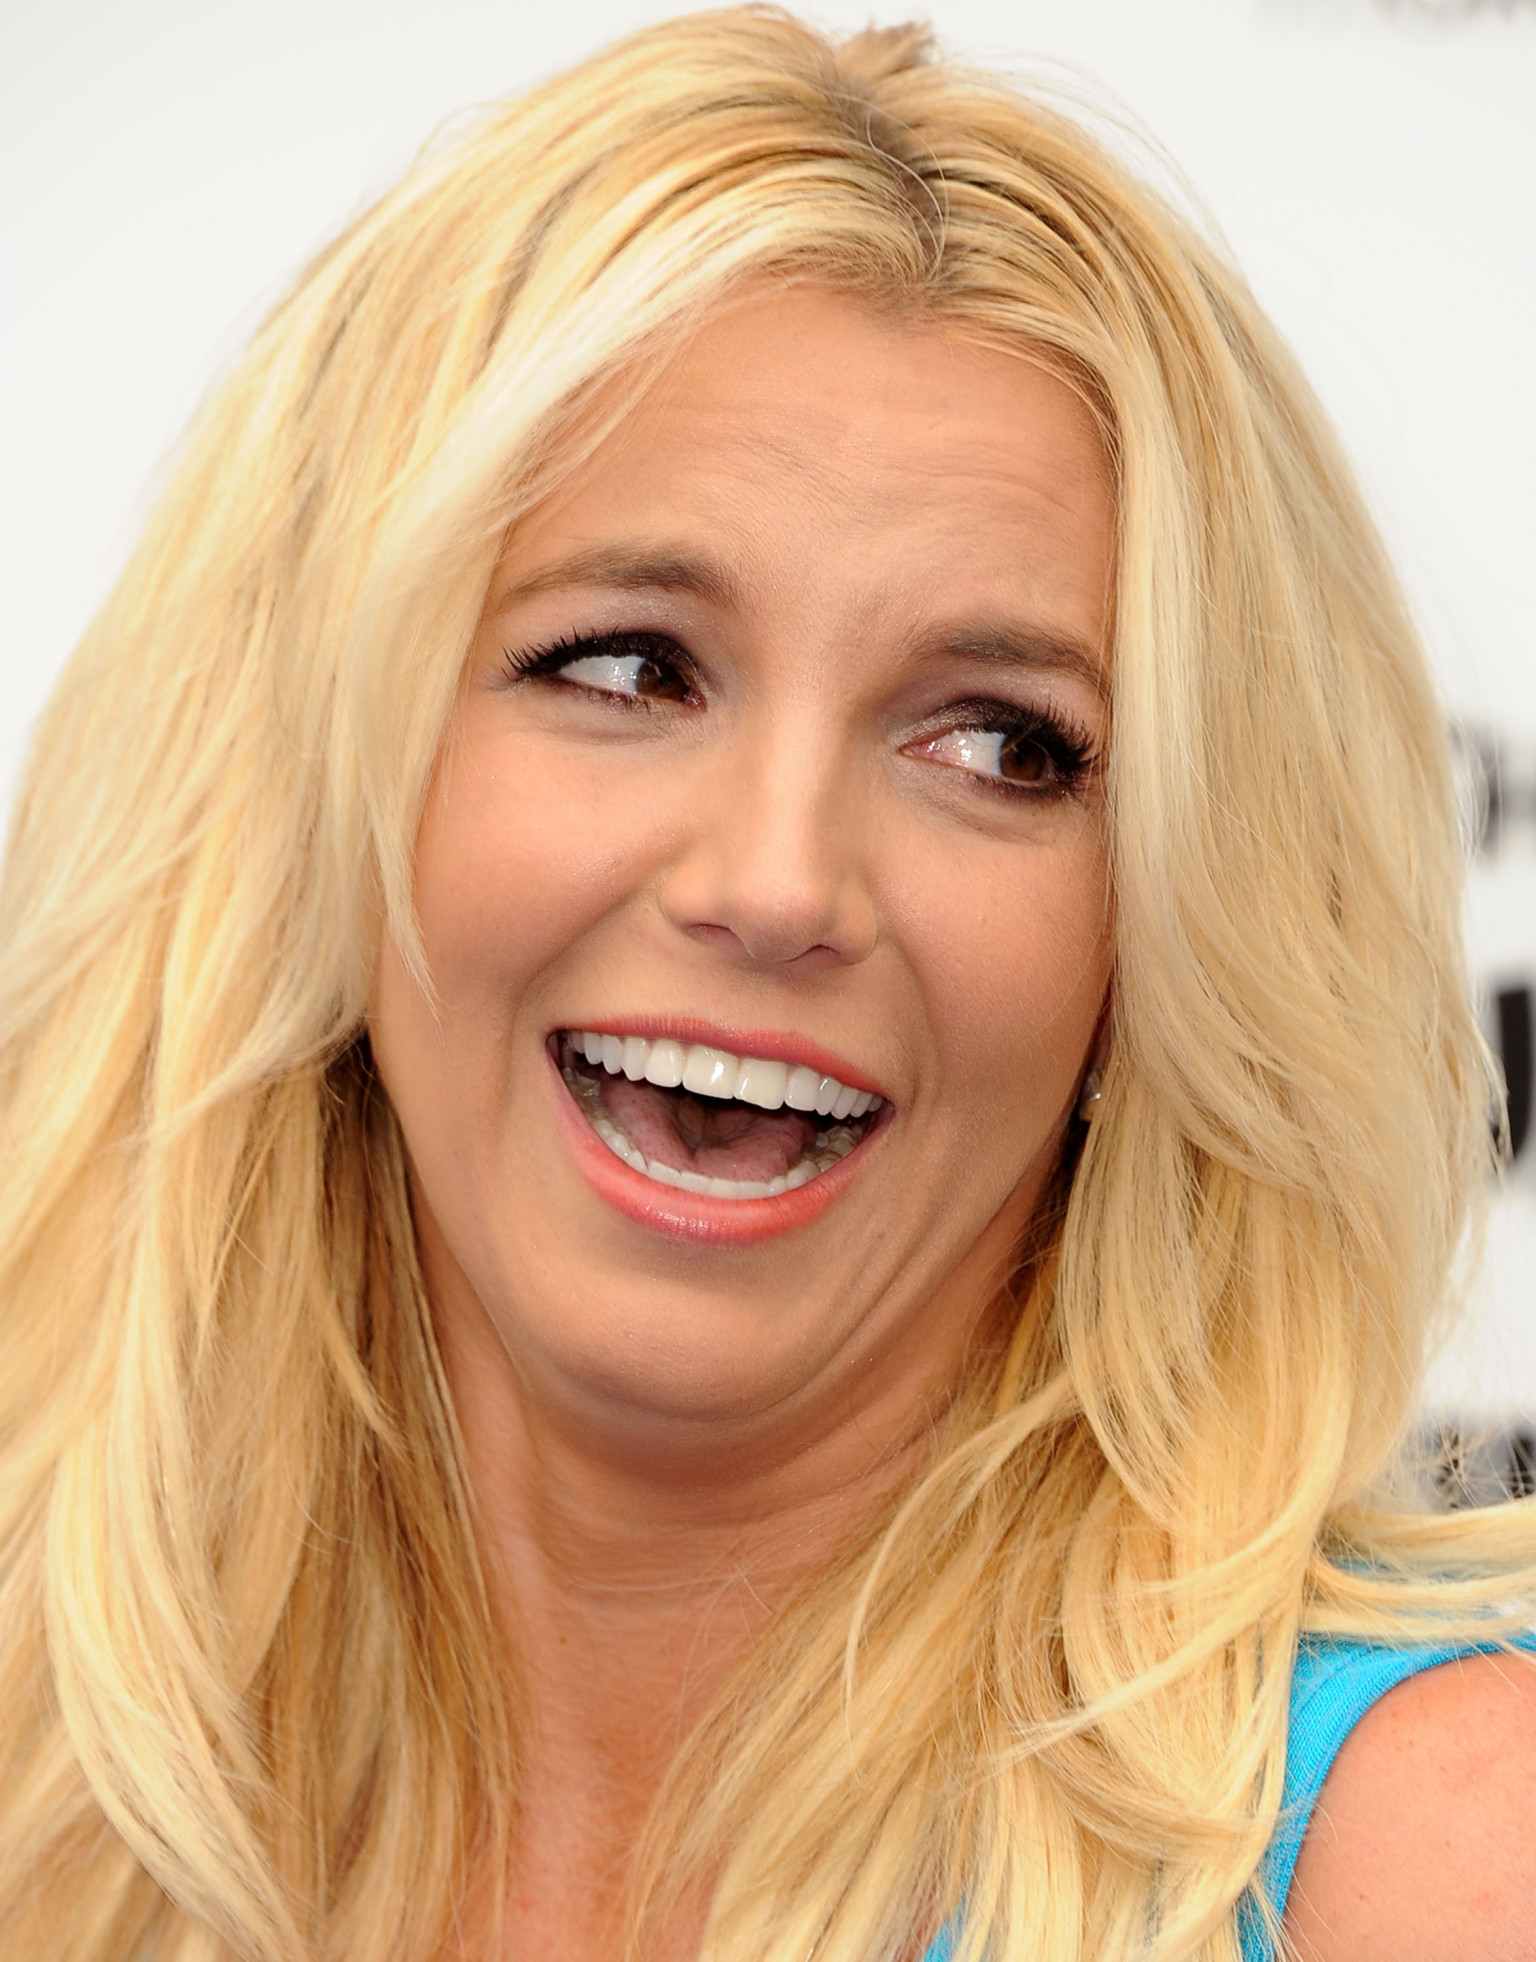 Britney Spears Is Beaming With New Puppy After Rehearsal | HuffPost